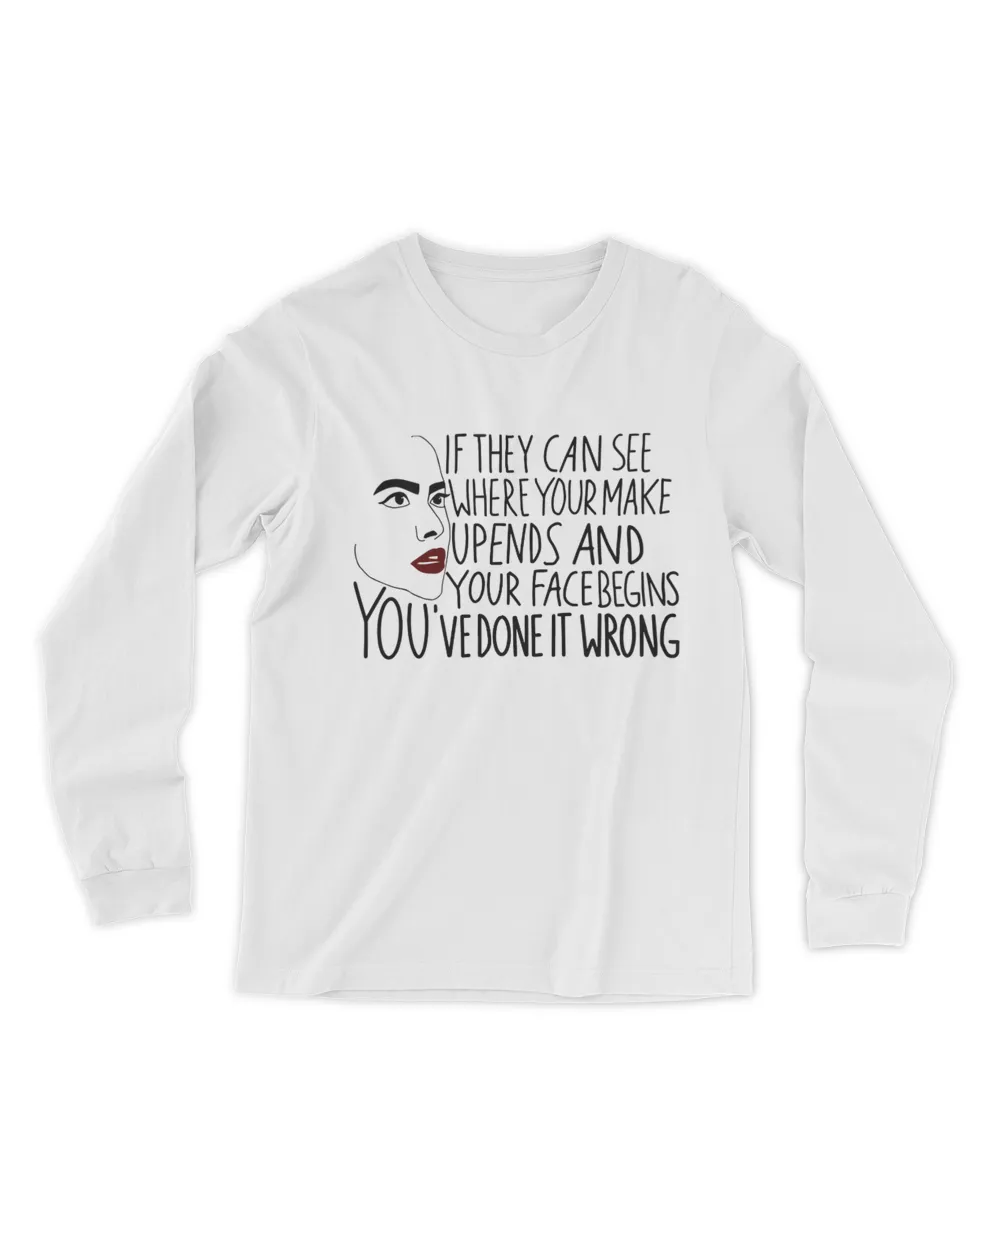 If They Can See Where Your Make Upends And Your Face Begins You've Done It Wrong Shirt